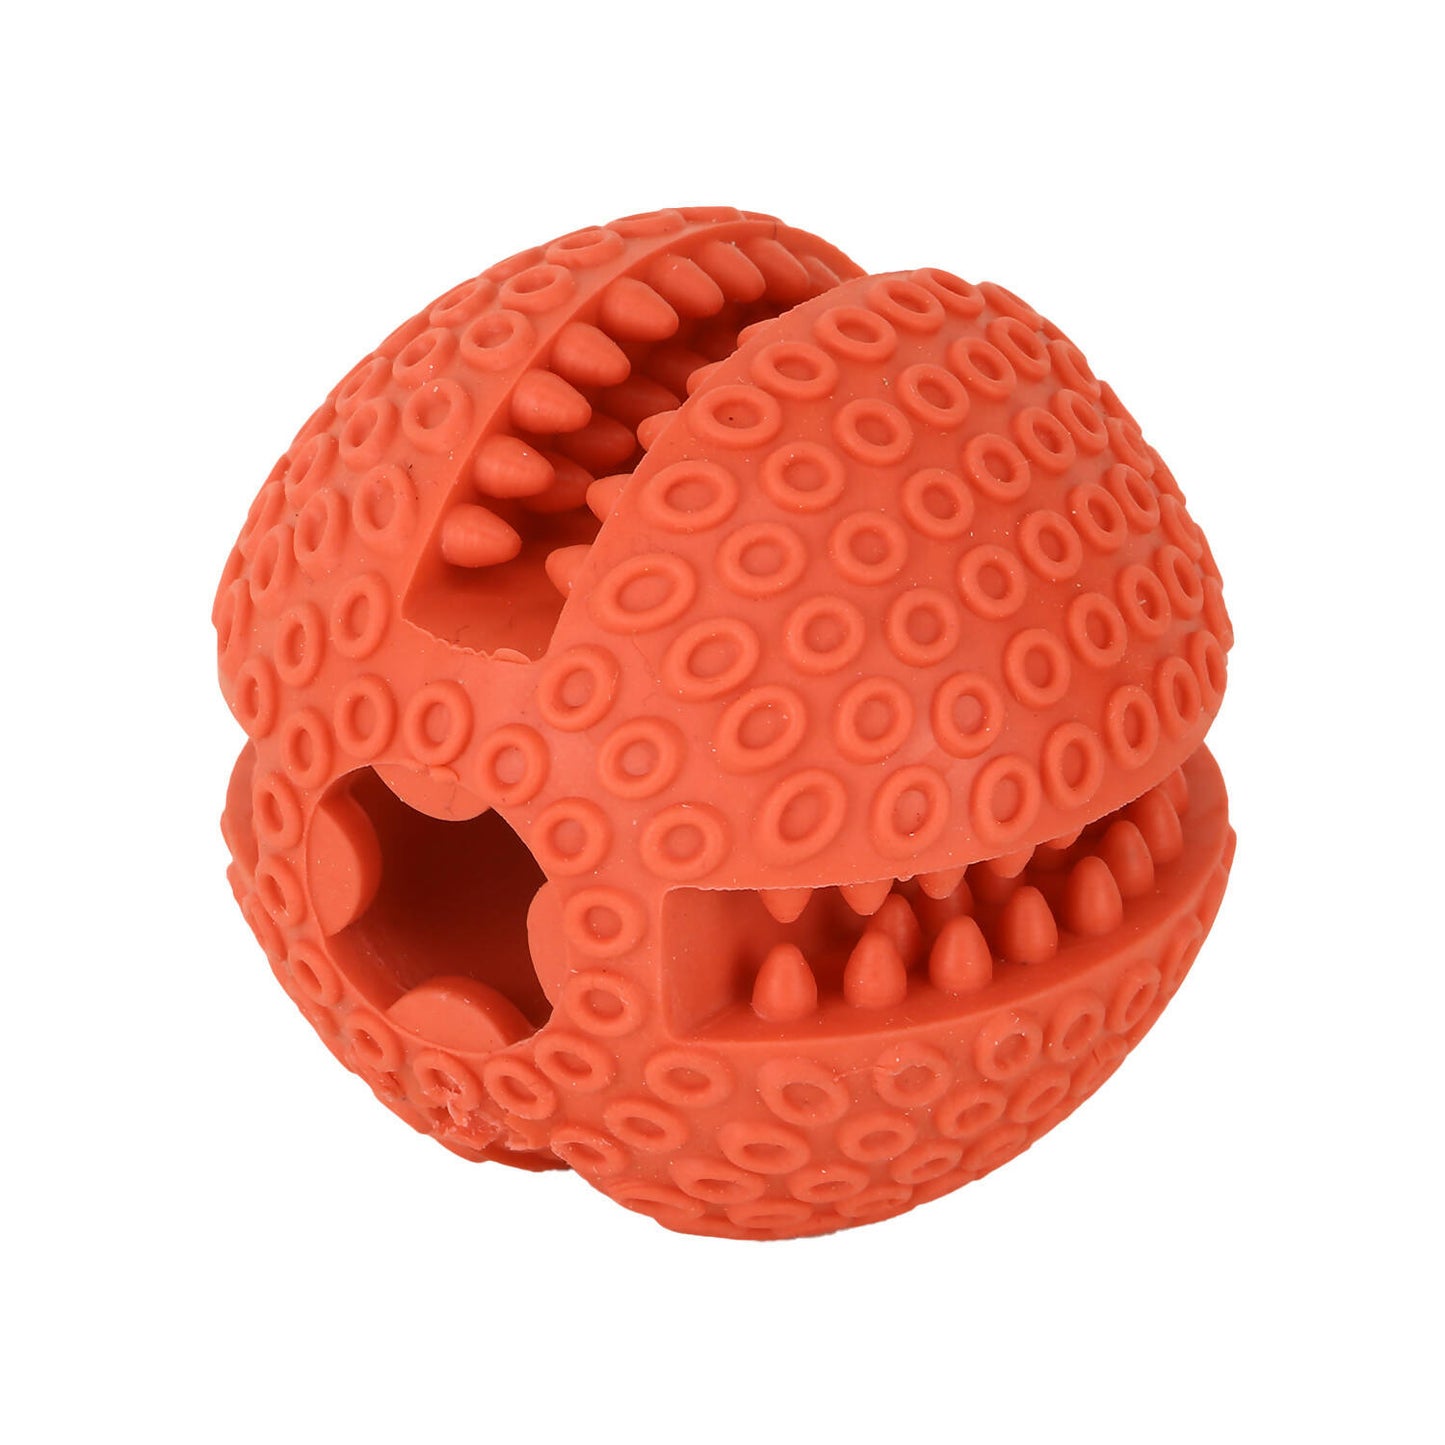 Basil - Solid Ball with Hollow centre & Grooves in Sides Toy For Dogs